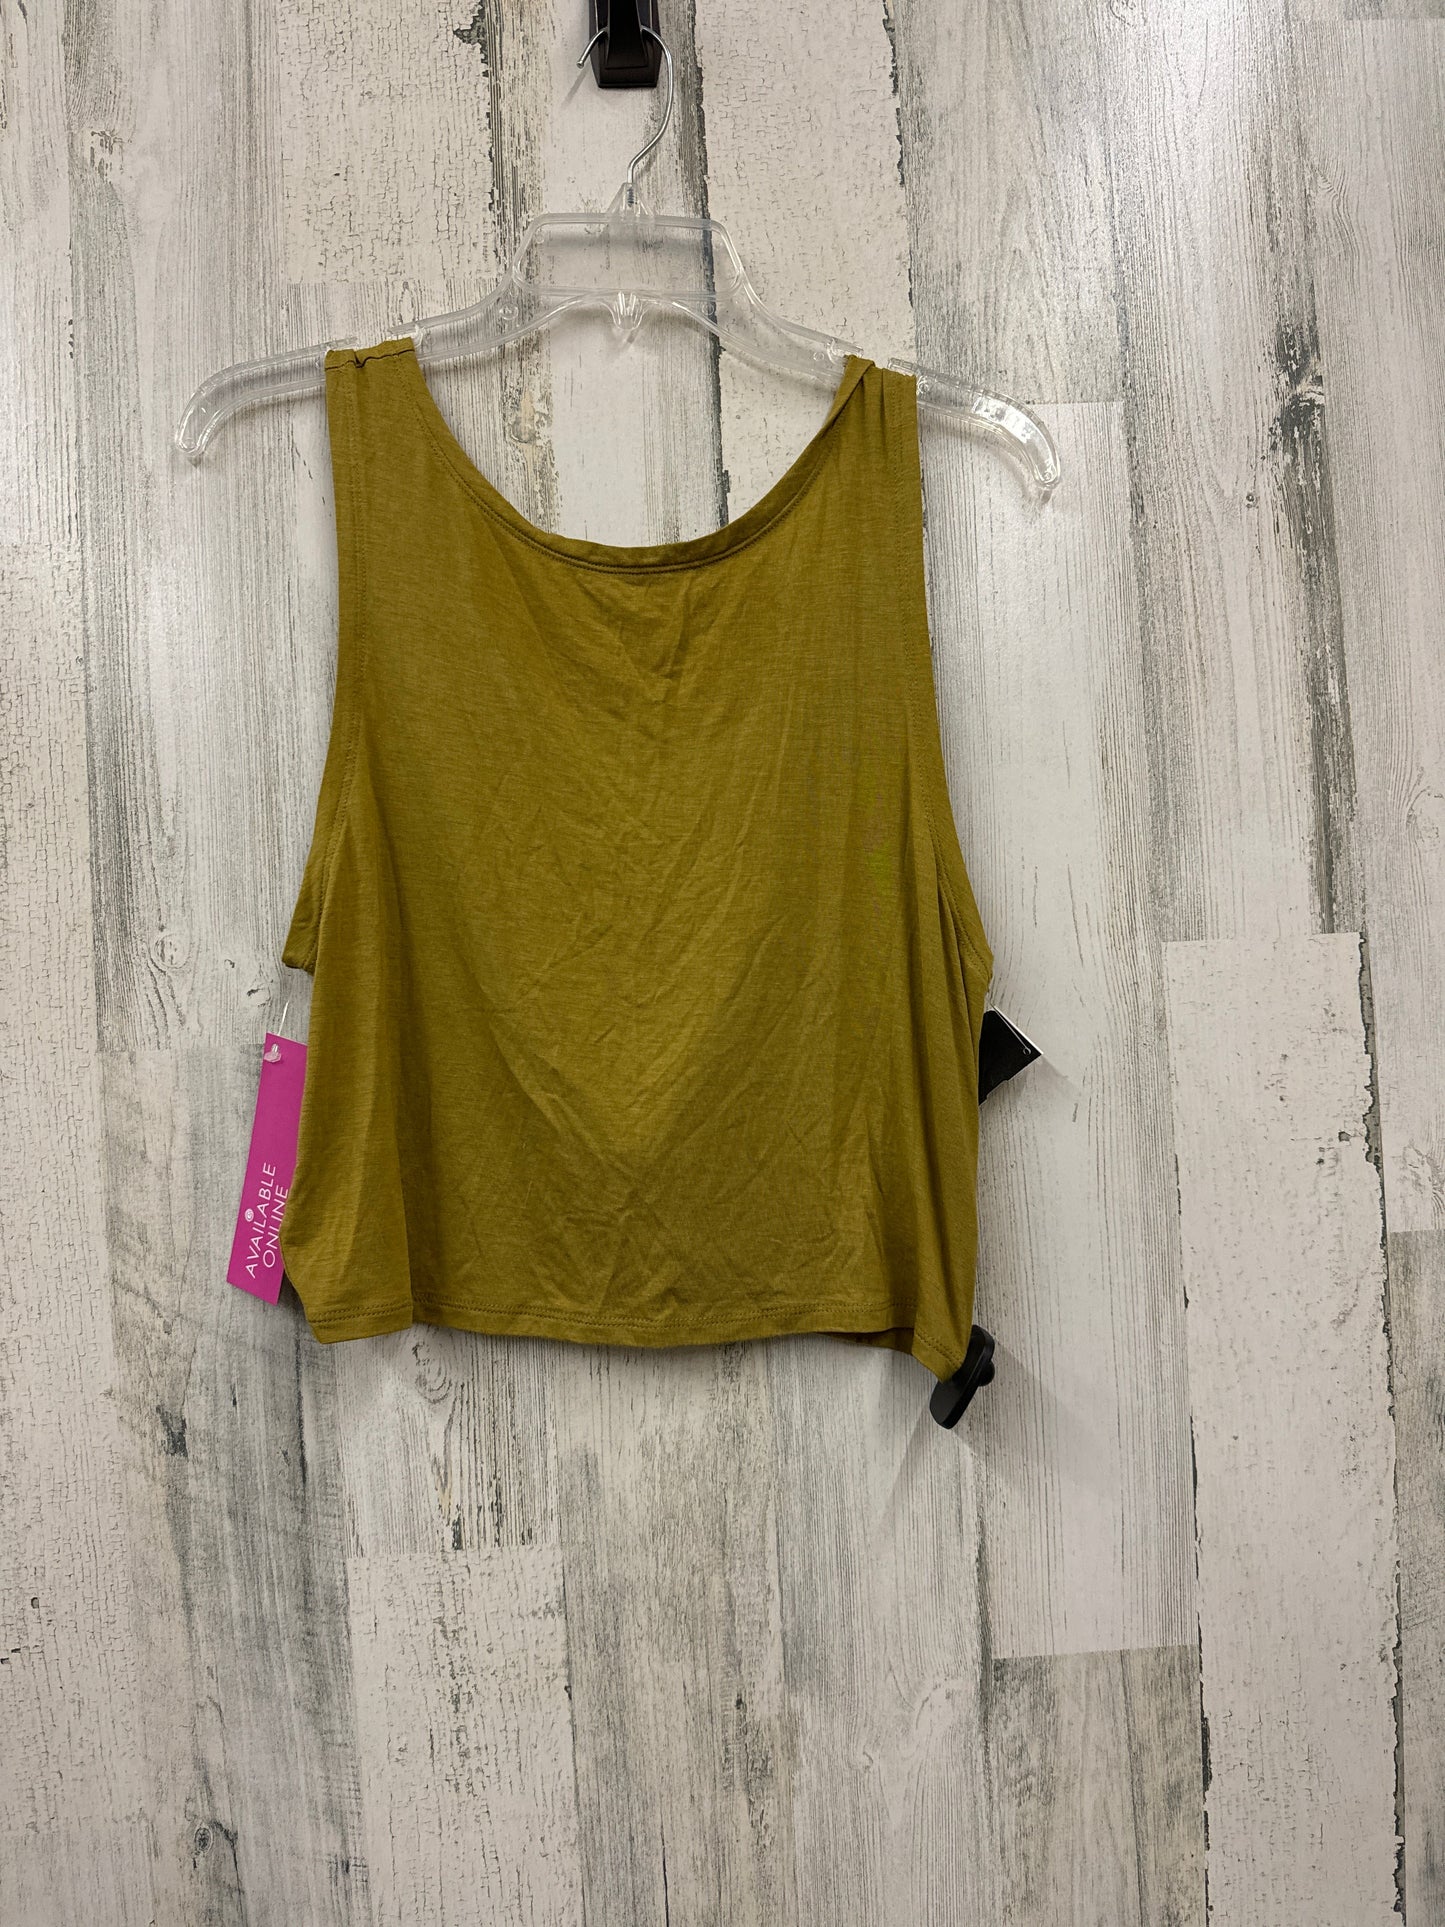 Green Tank Top Aerie, Size S